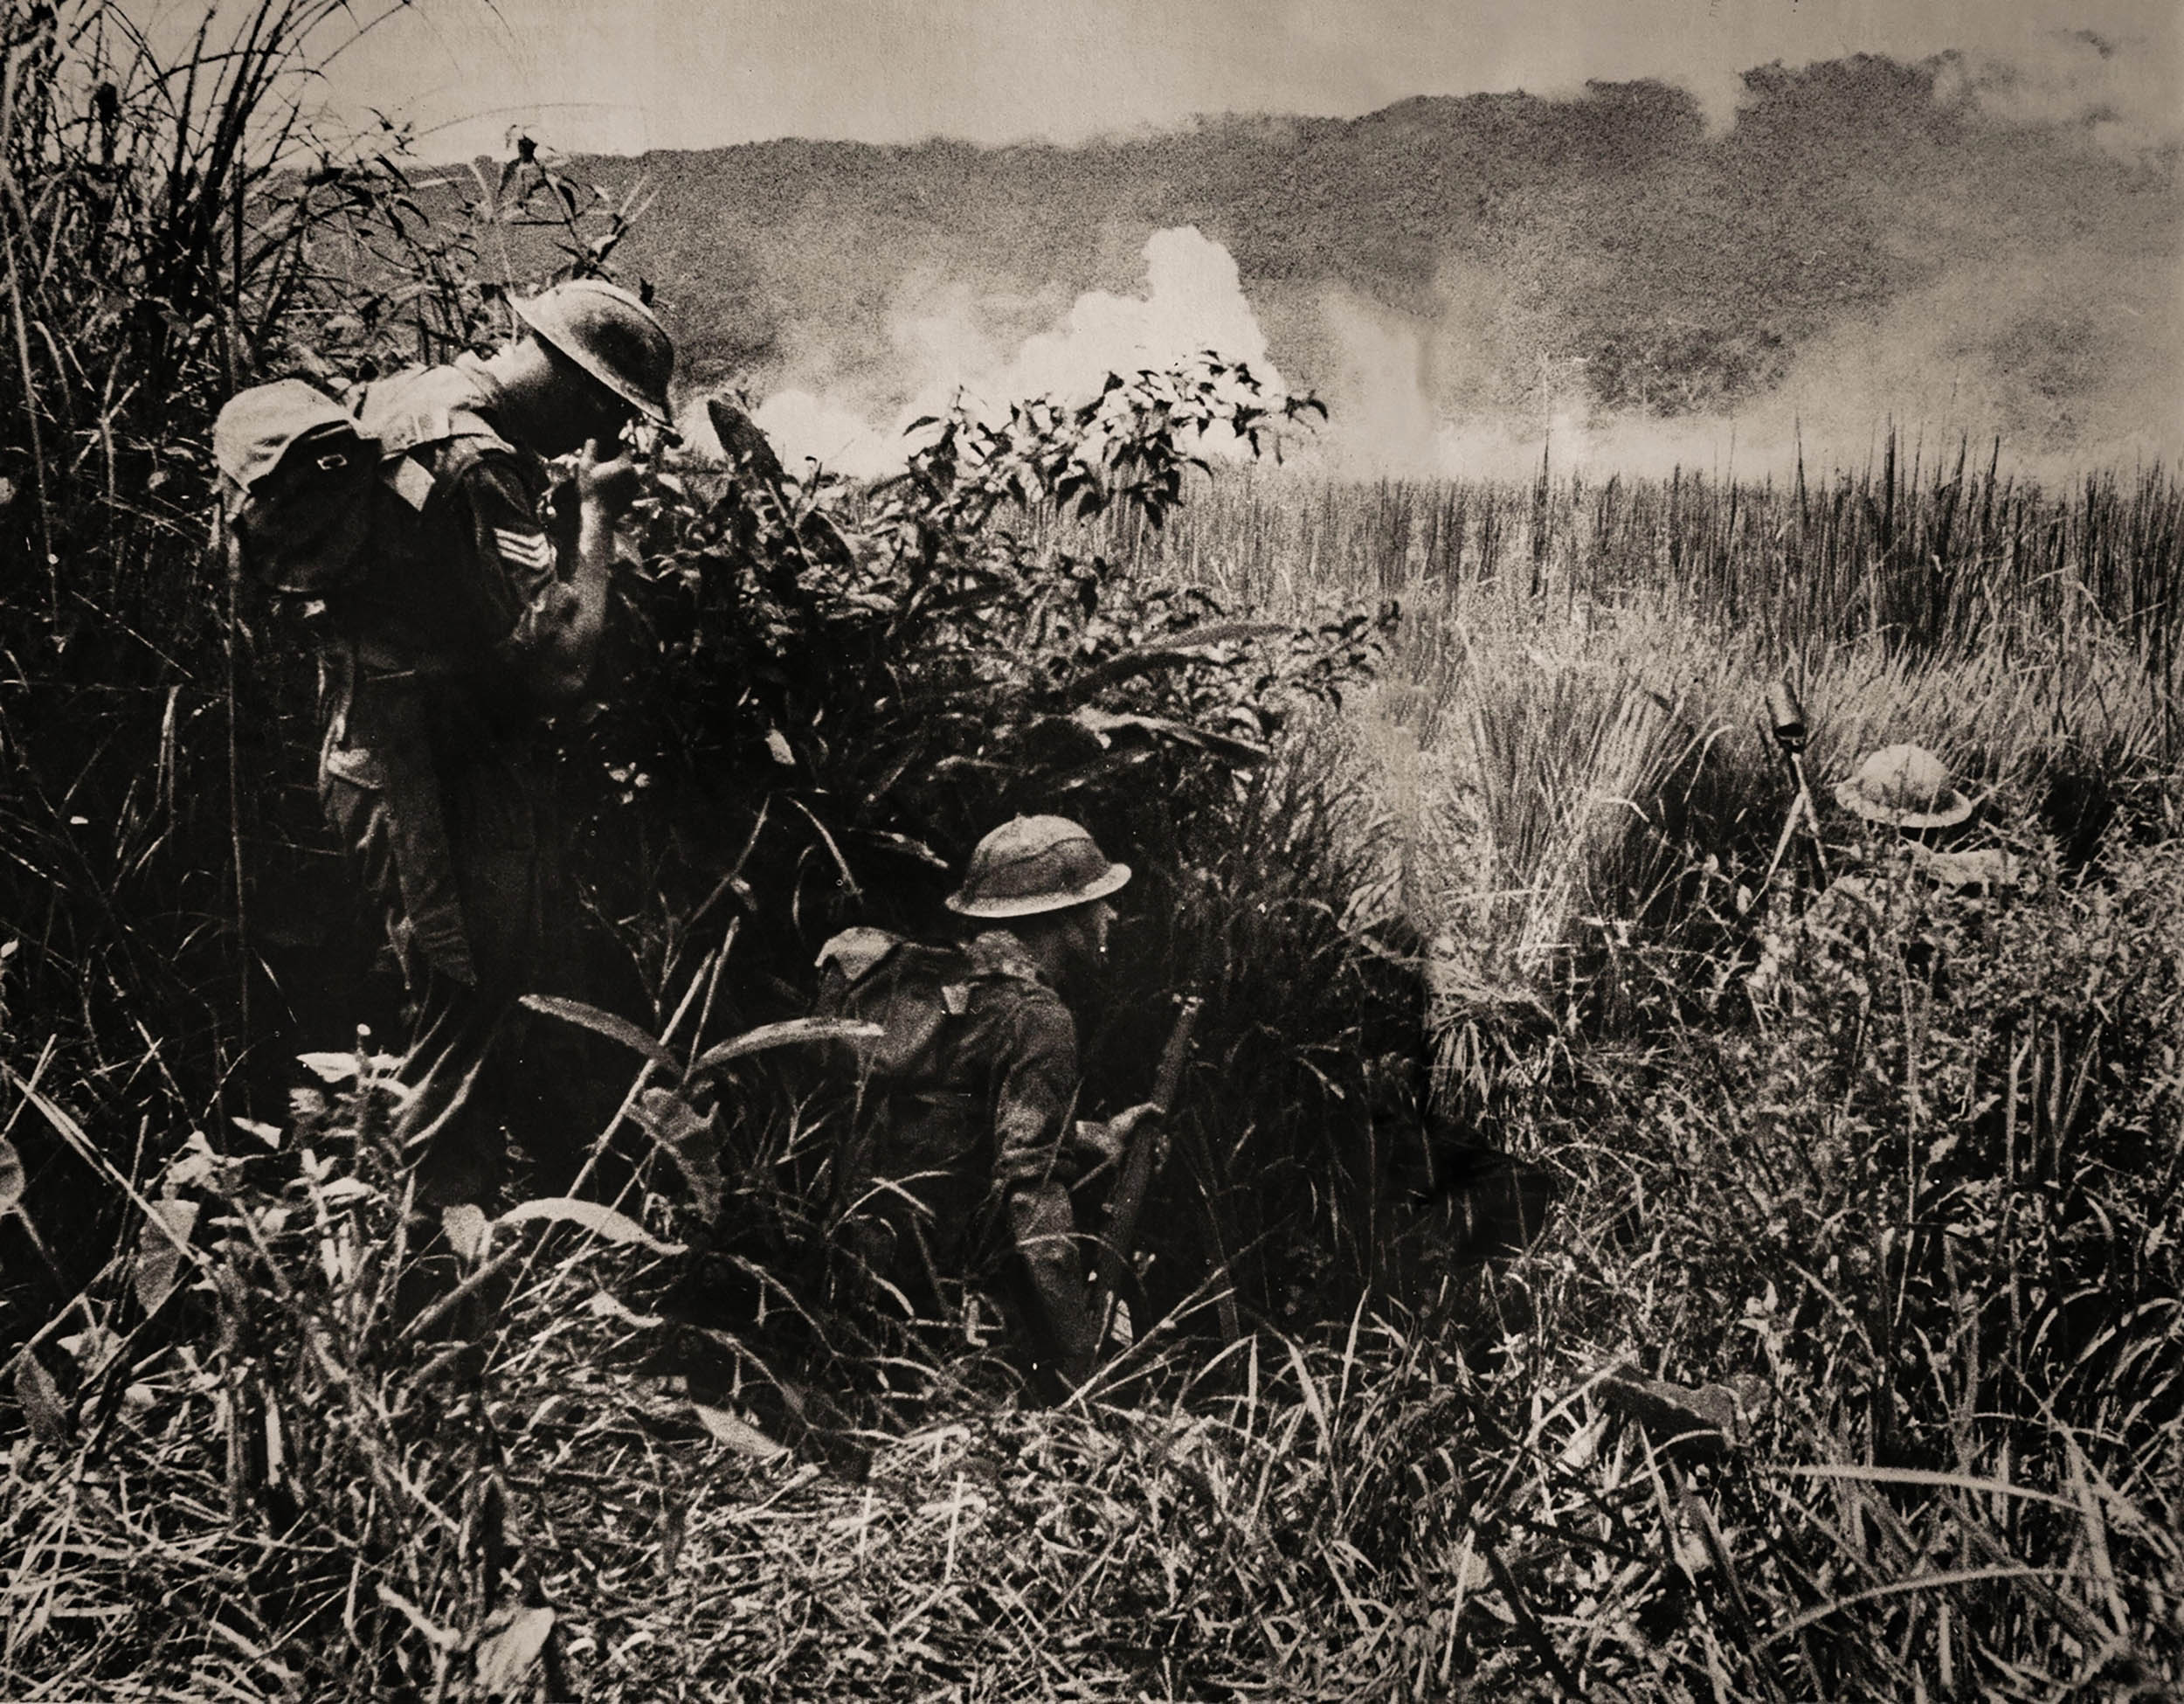 British infantrymen fire mortar bombs during Battle of Imphal in region around city of Imphal, in Northeast India, circa March–July 1944 (De Luan/Alamy)